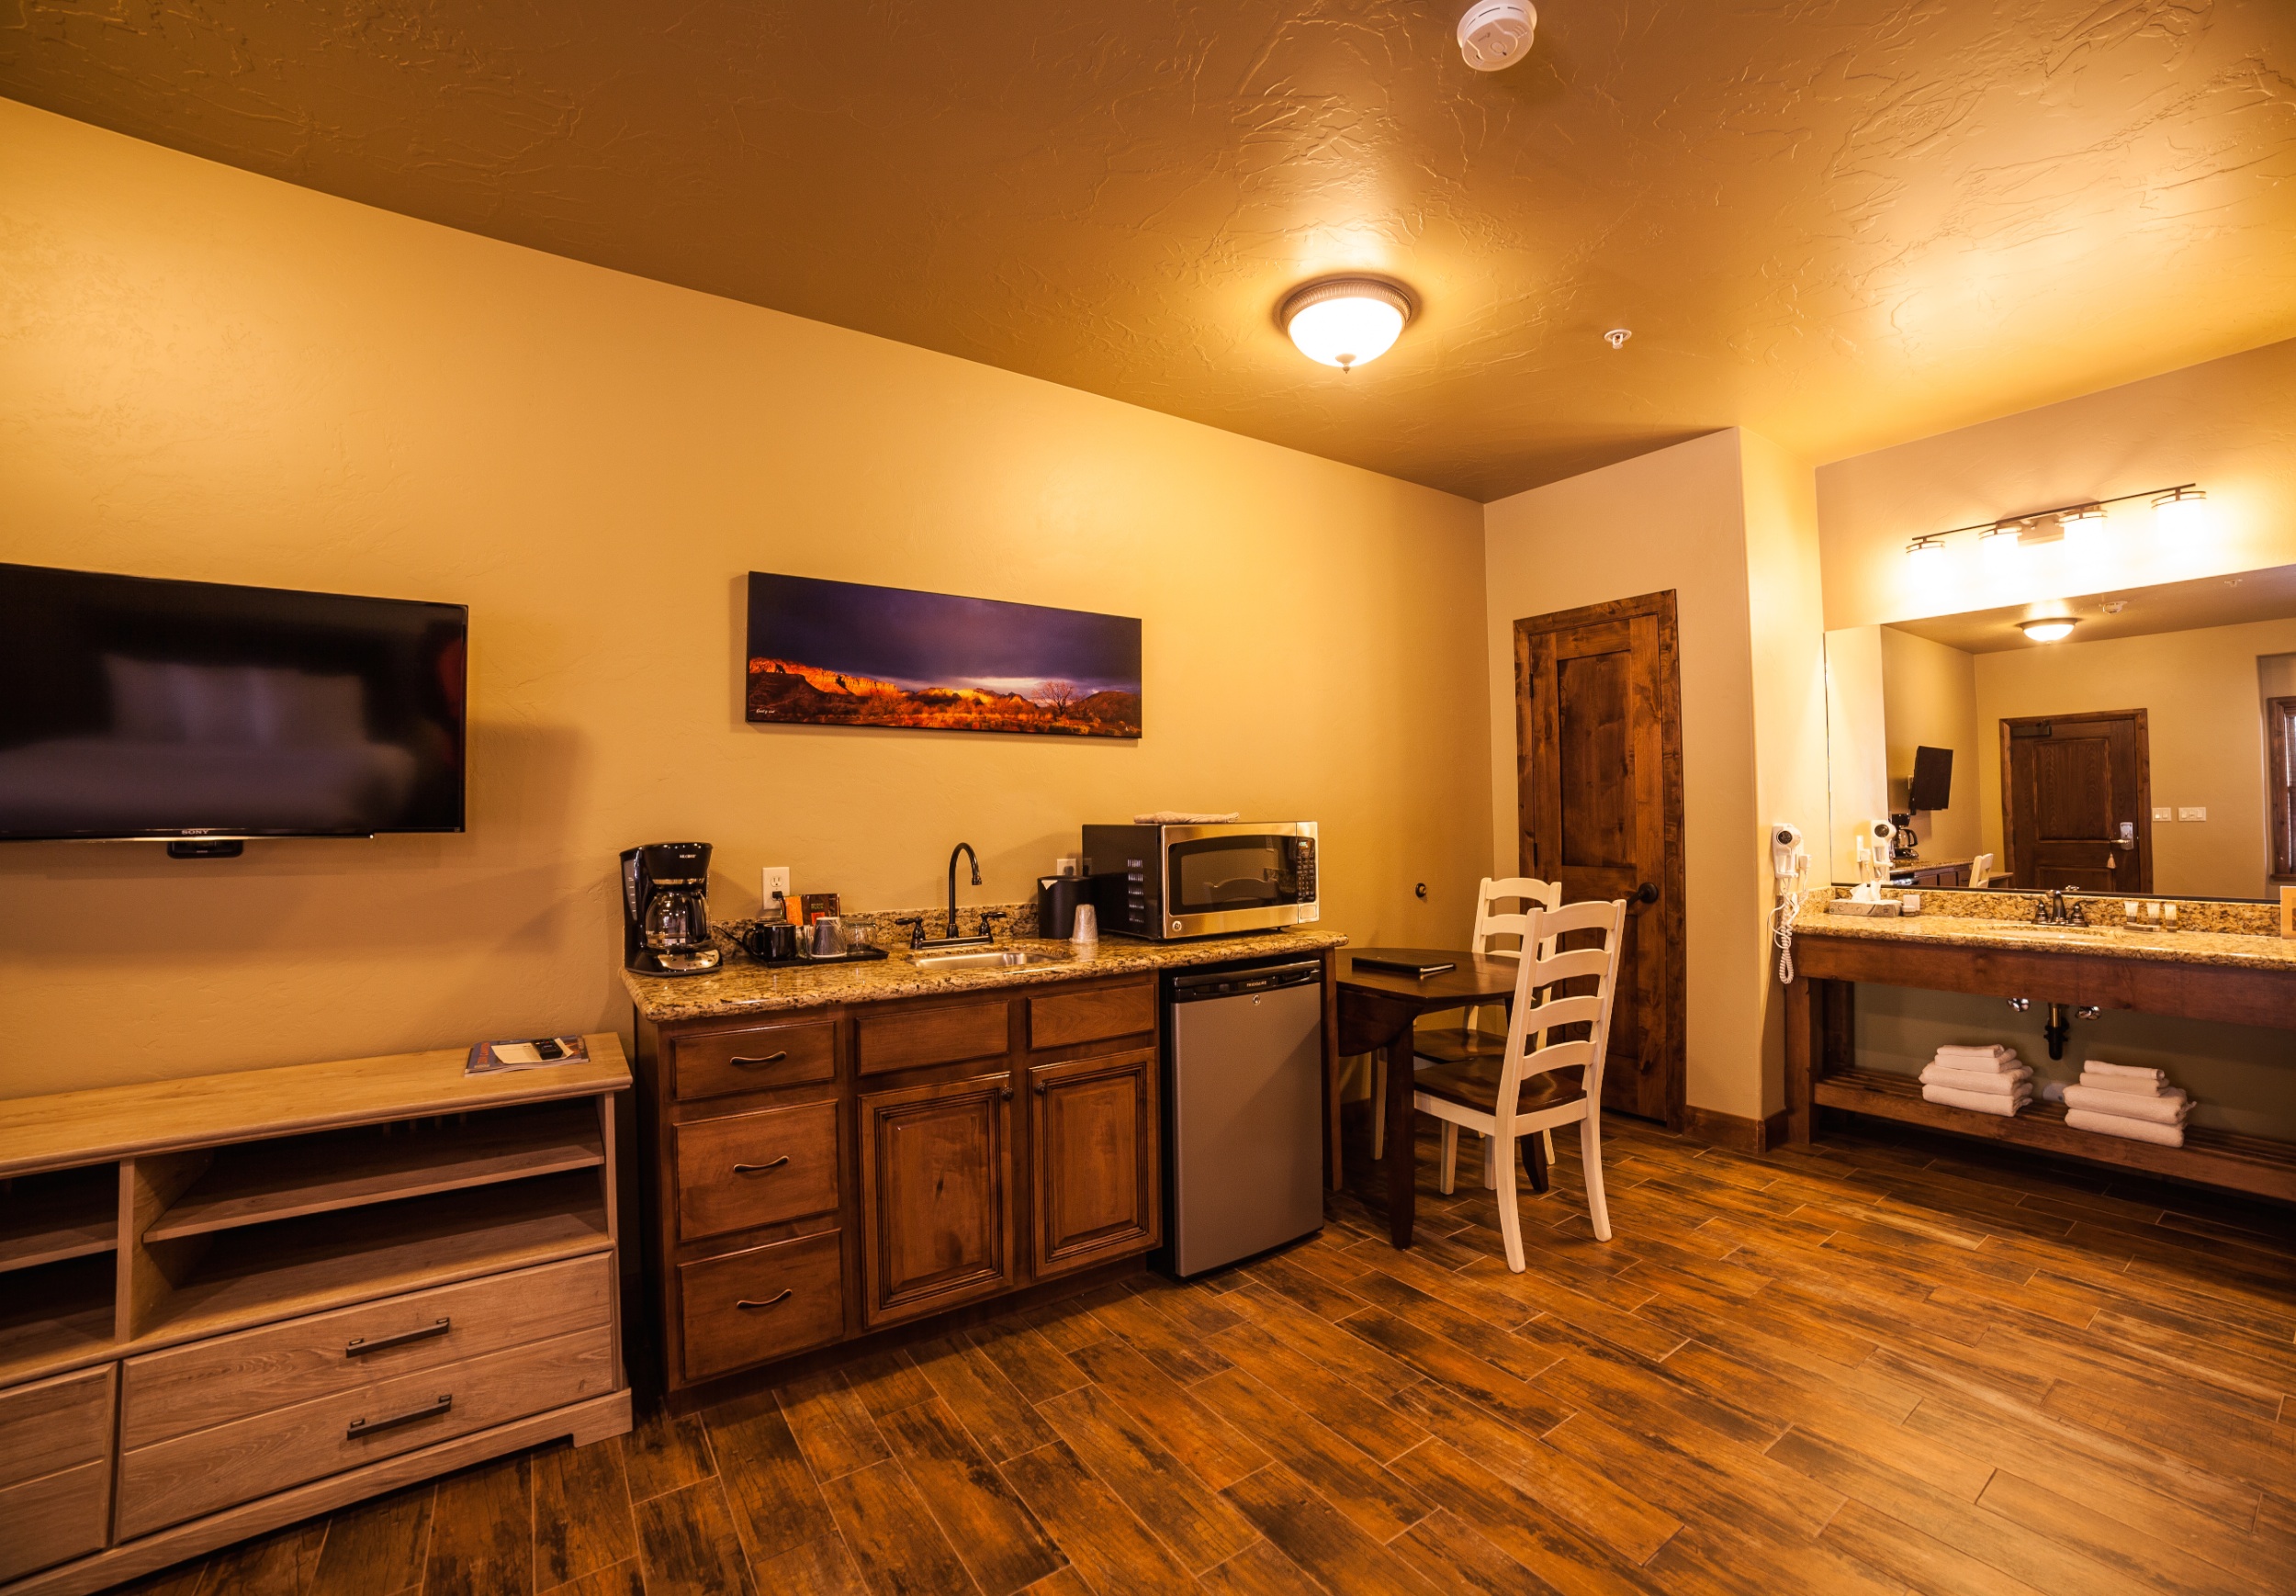 zions national park hotels